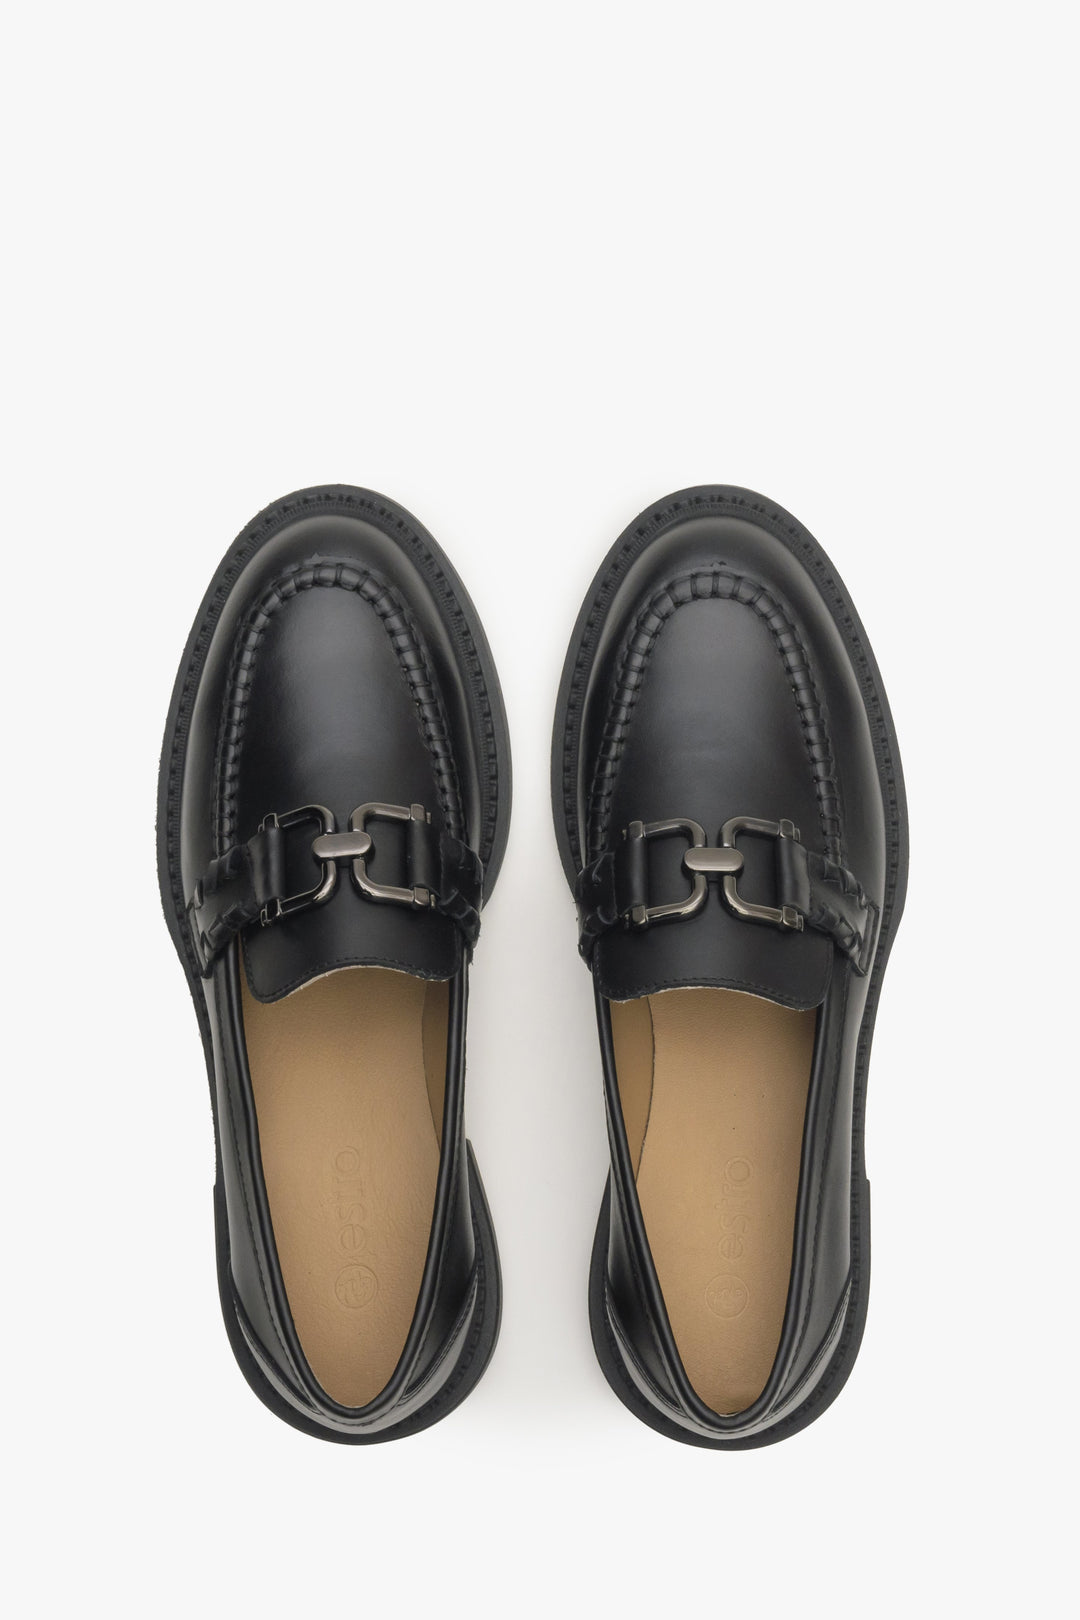 Women's black loafers - top view presentation.